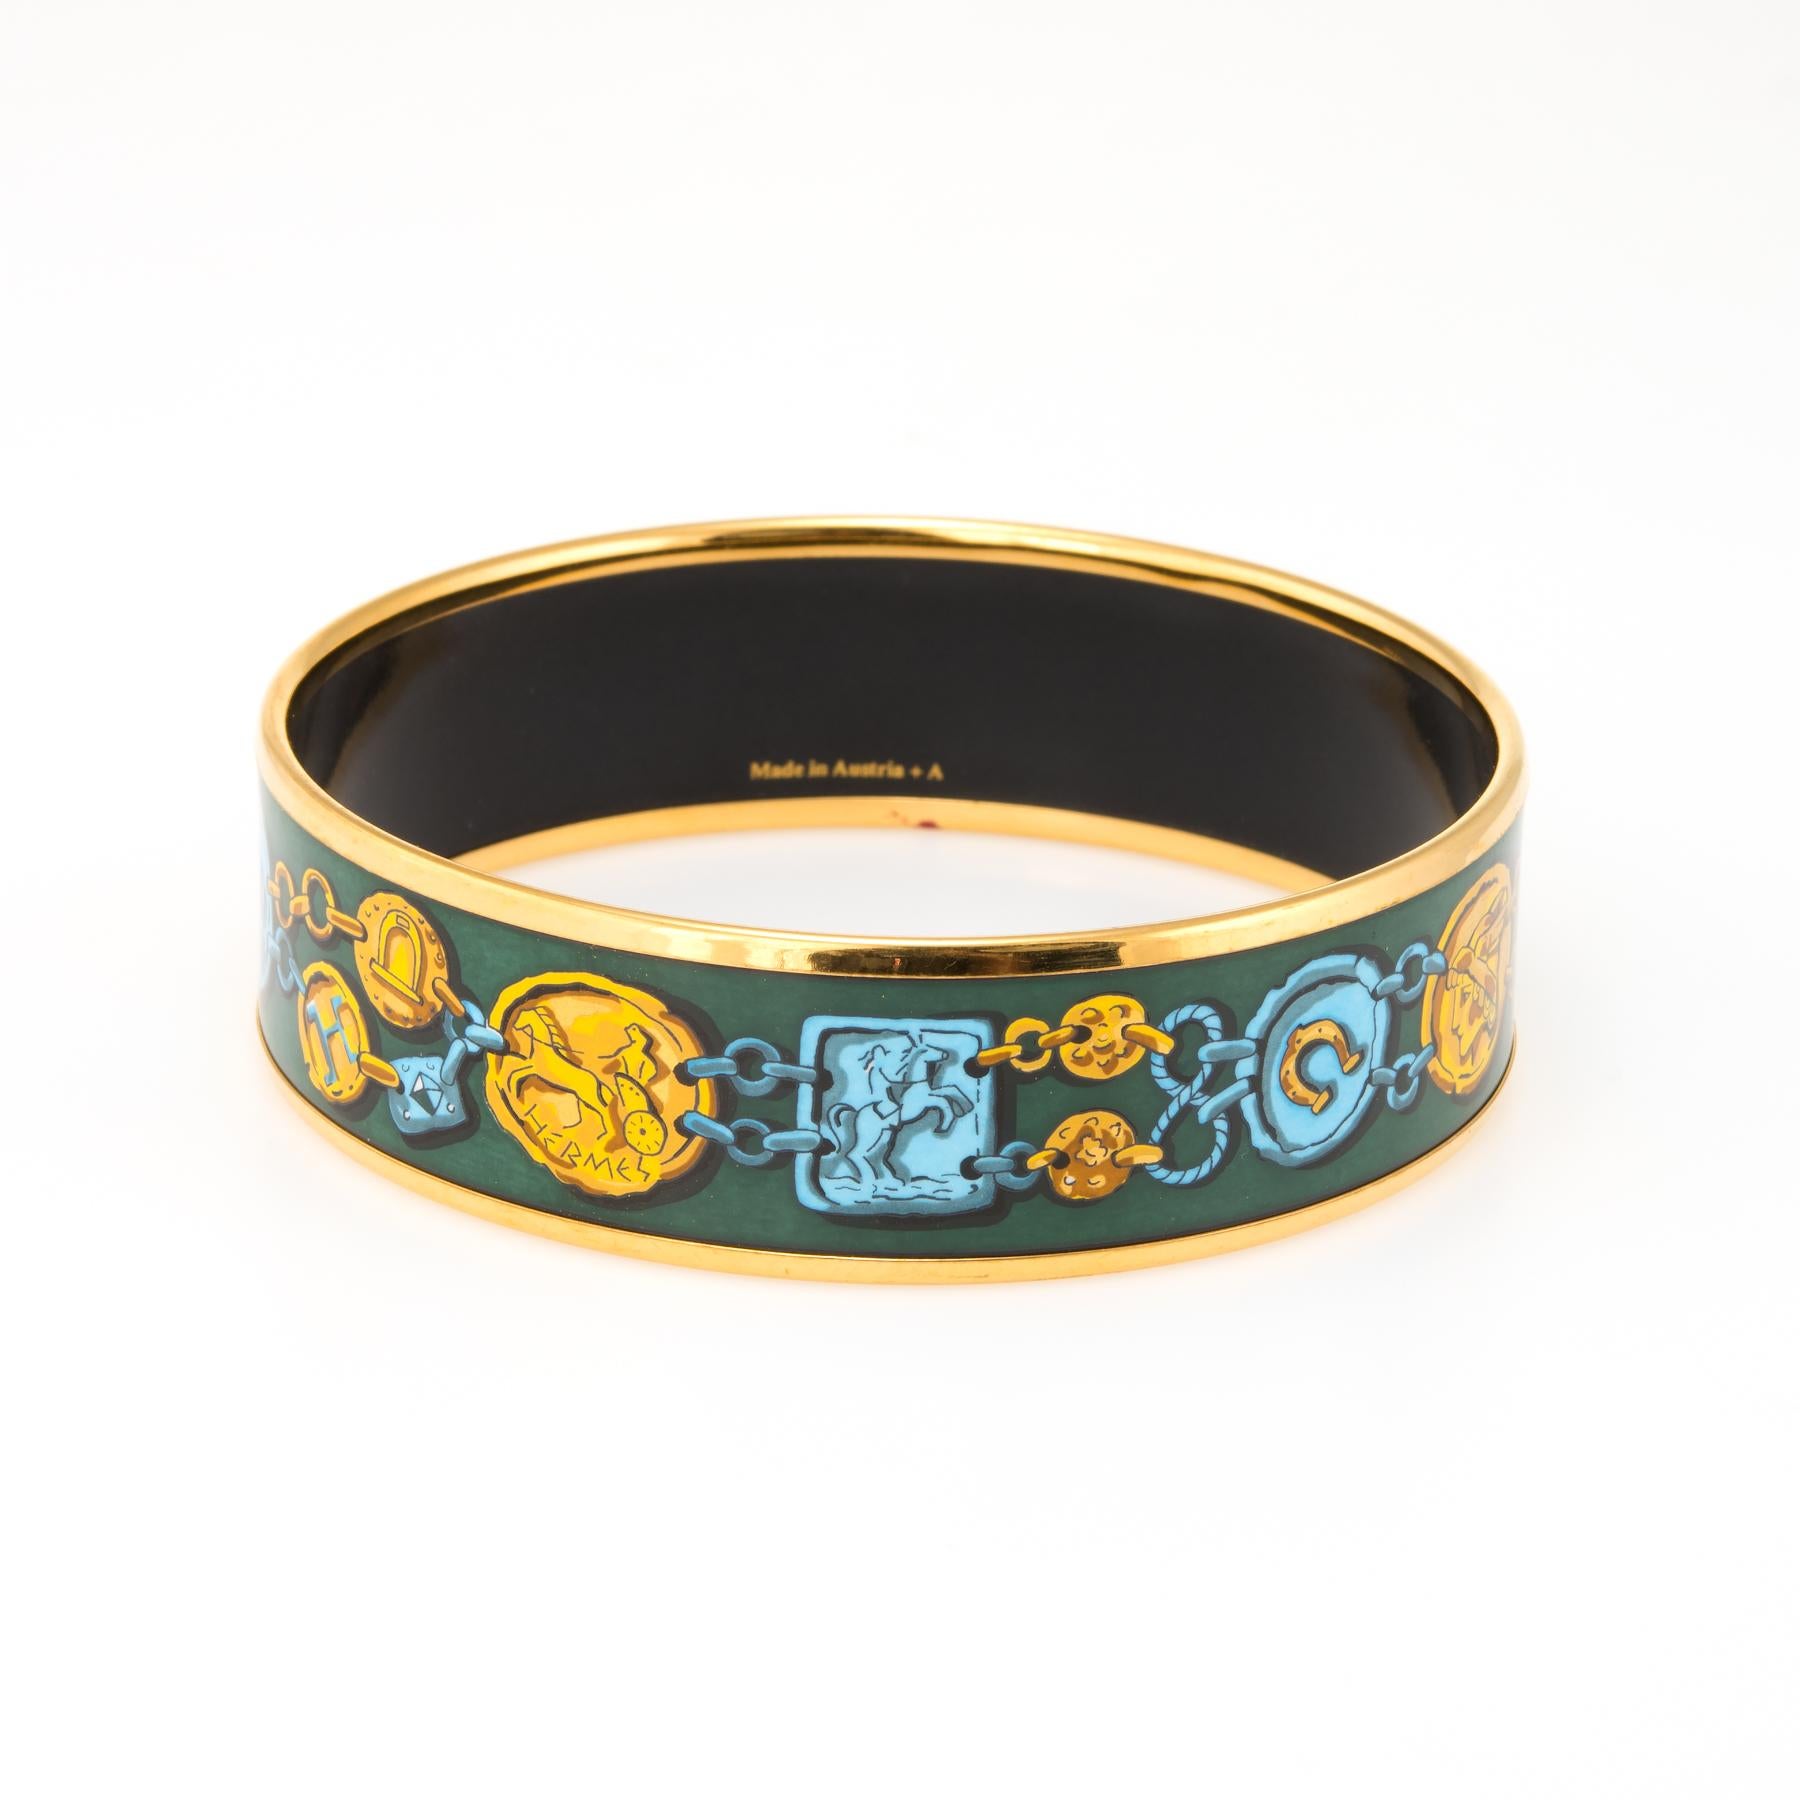 Pre owned Hermes enamel bracelet with a green, gold & turquoise printed equestrian design. 

The wide 3/4 inch bracelet is a size 65 - 7 1/2 inches.

The bracelet is in excellent original condition.

Particulars:

Weight: 33.4 grams

Stones: N/A.